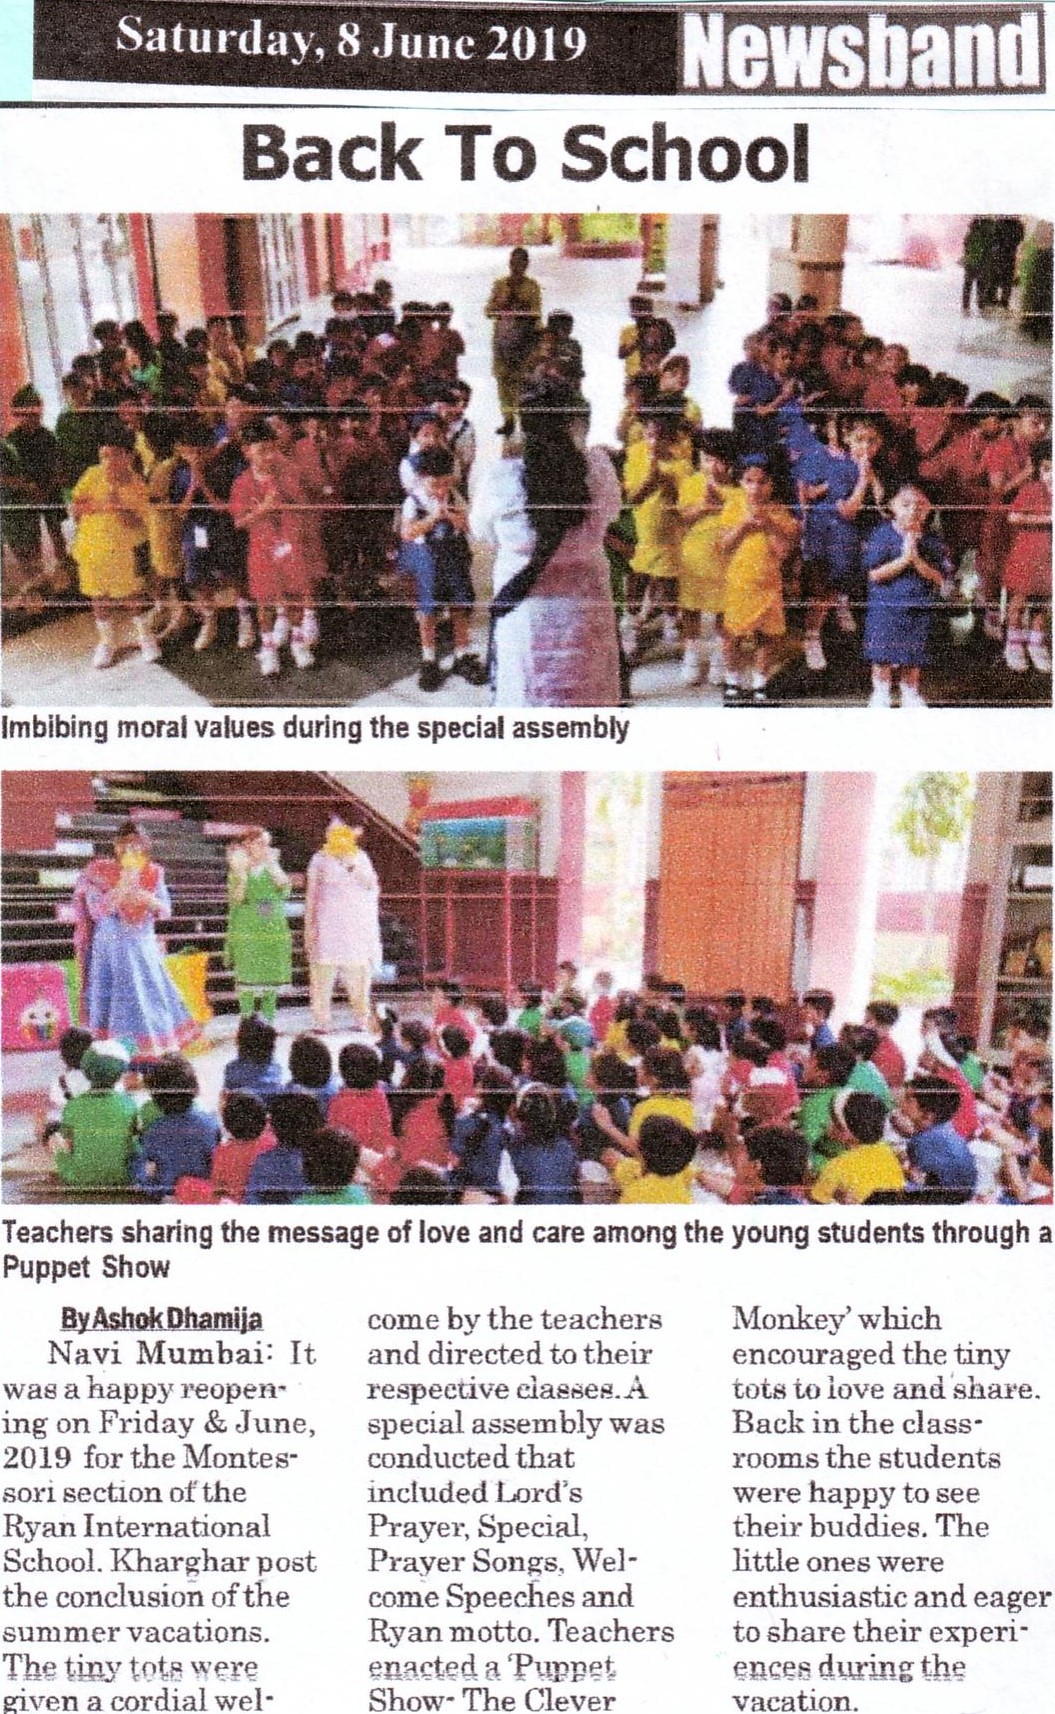 Back to school, was mentioned in News band - Ryan International School, Kharghar - Ryan Group